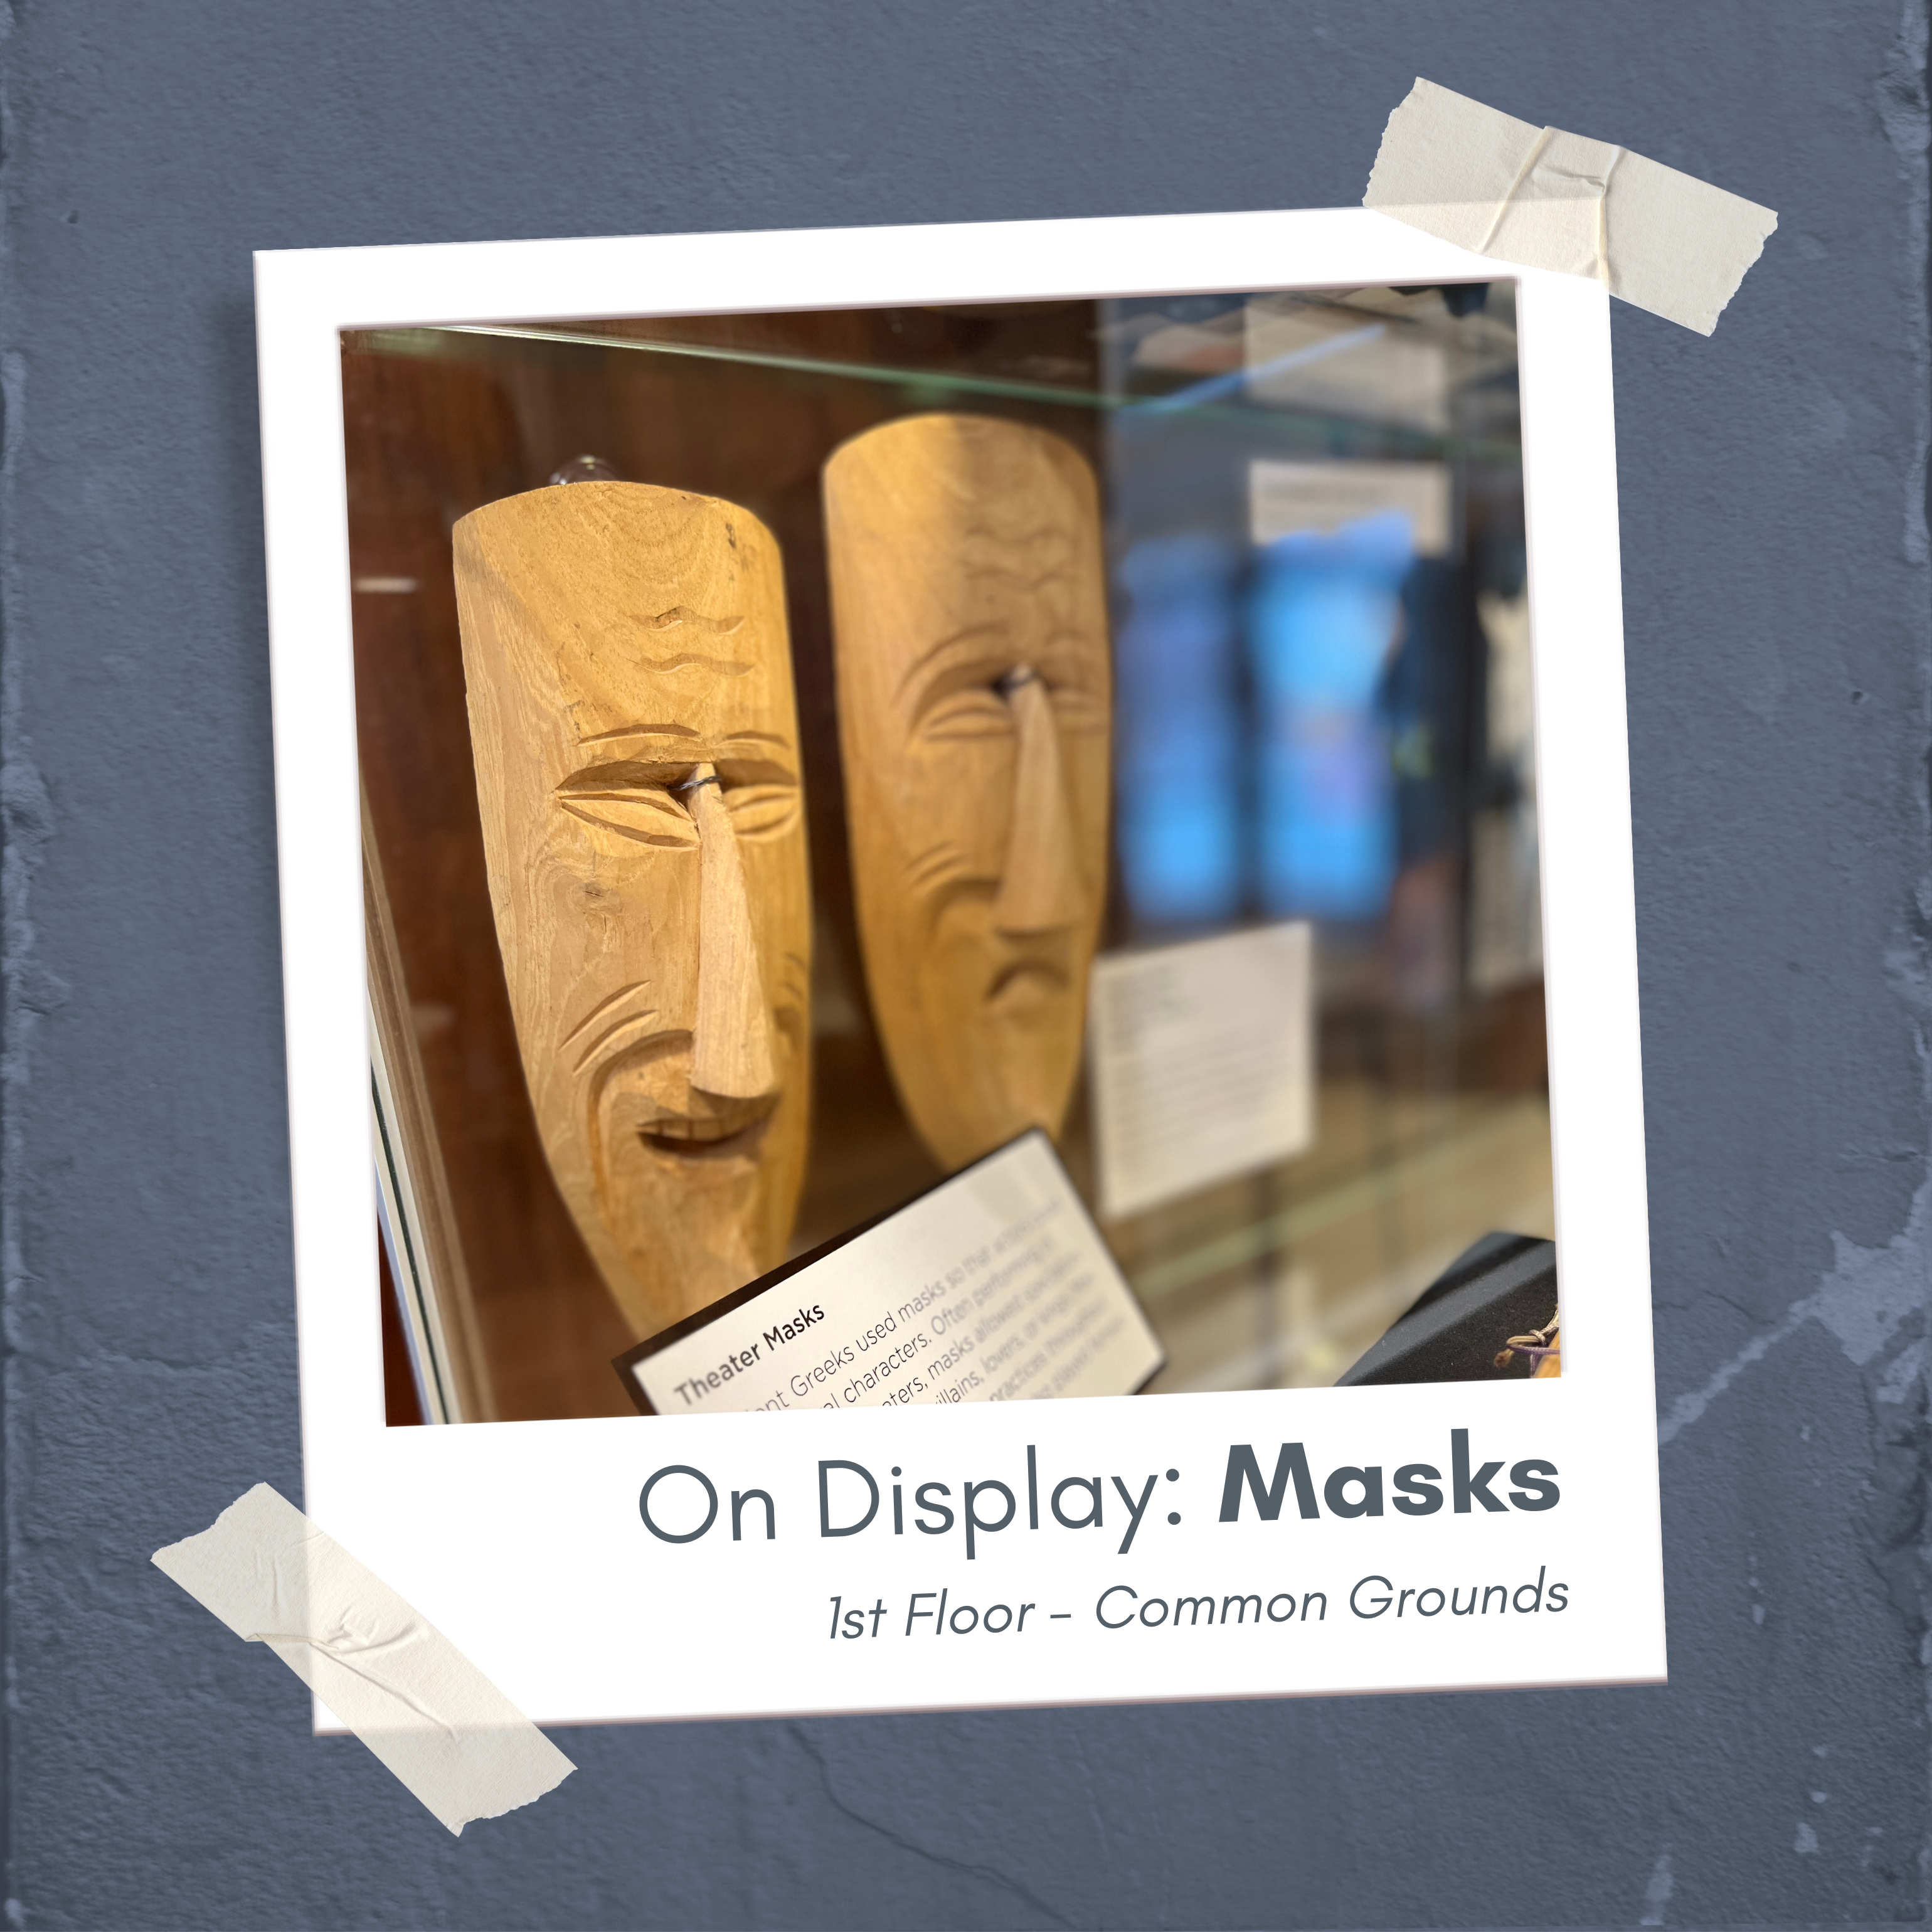 On Display: Masks ; 1st Floor - Common Grounds